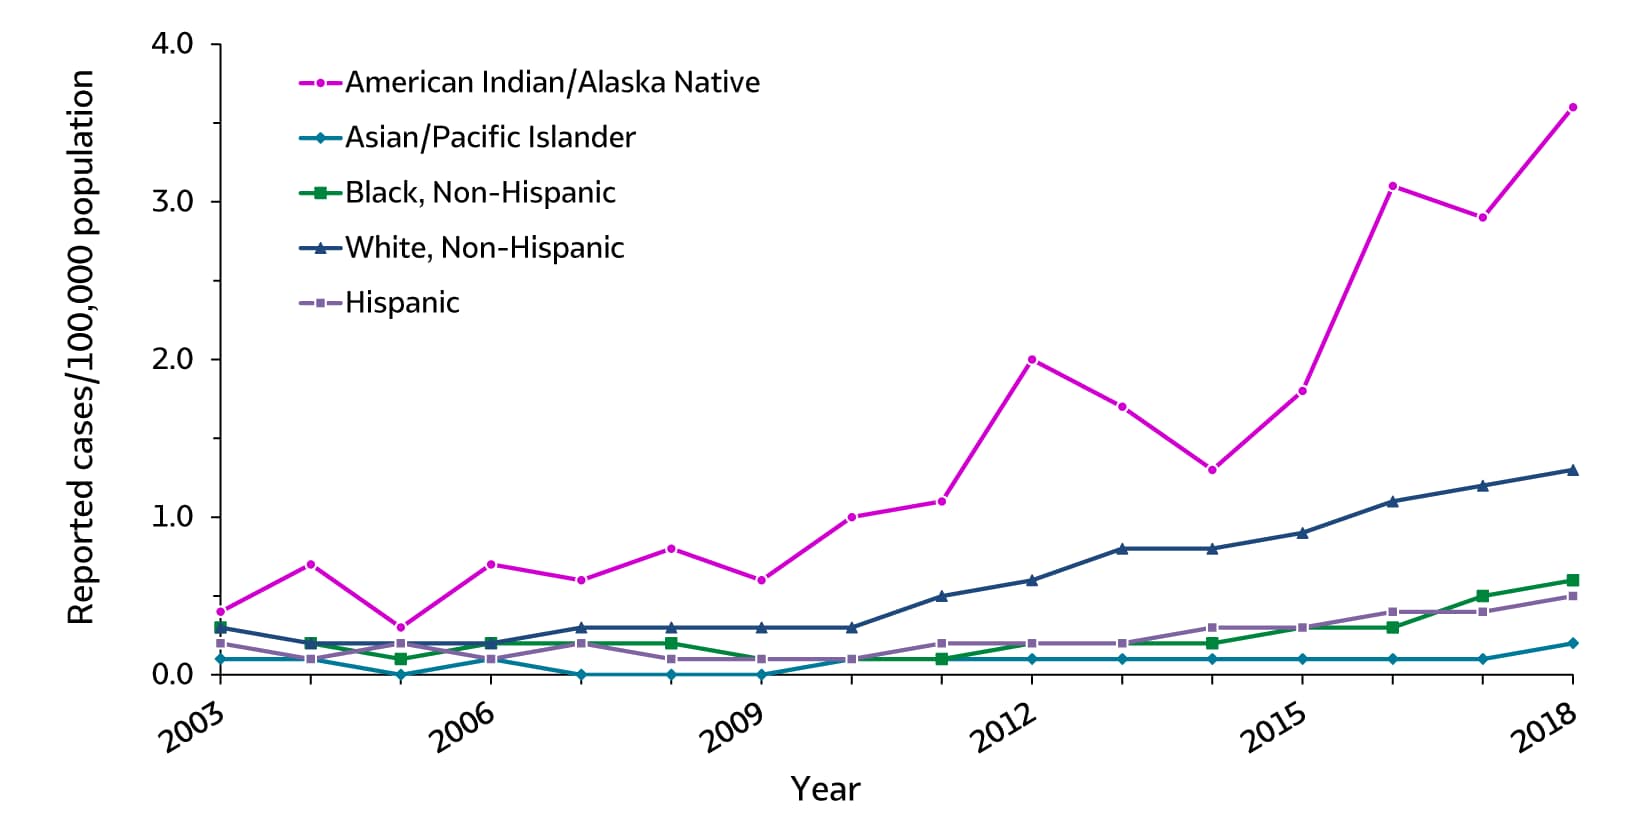 Figure 3.6. This line graph shows trends in rates of acute hepatitis C by race/ethnicity from 2003 through 2018. The race/ethnicity classifications are American Indian/Alaska Native, Asian/Pacific Islander, Black non-Hispanic, White non-Hispanic, and Hispanic. Apart from Asian/Pacific Islanders, rates have increased for all race/ethnicity groups since 2012. There was a small increase in acute hepatitis C among Asian/Pacific Islanders in 2018.